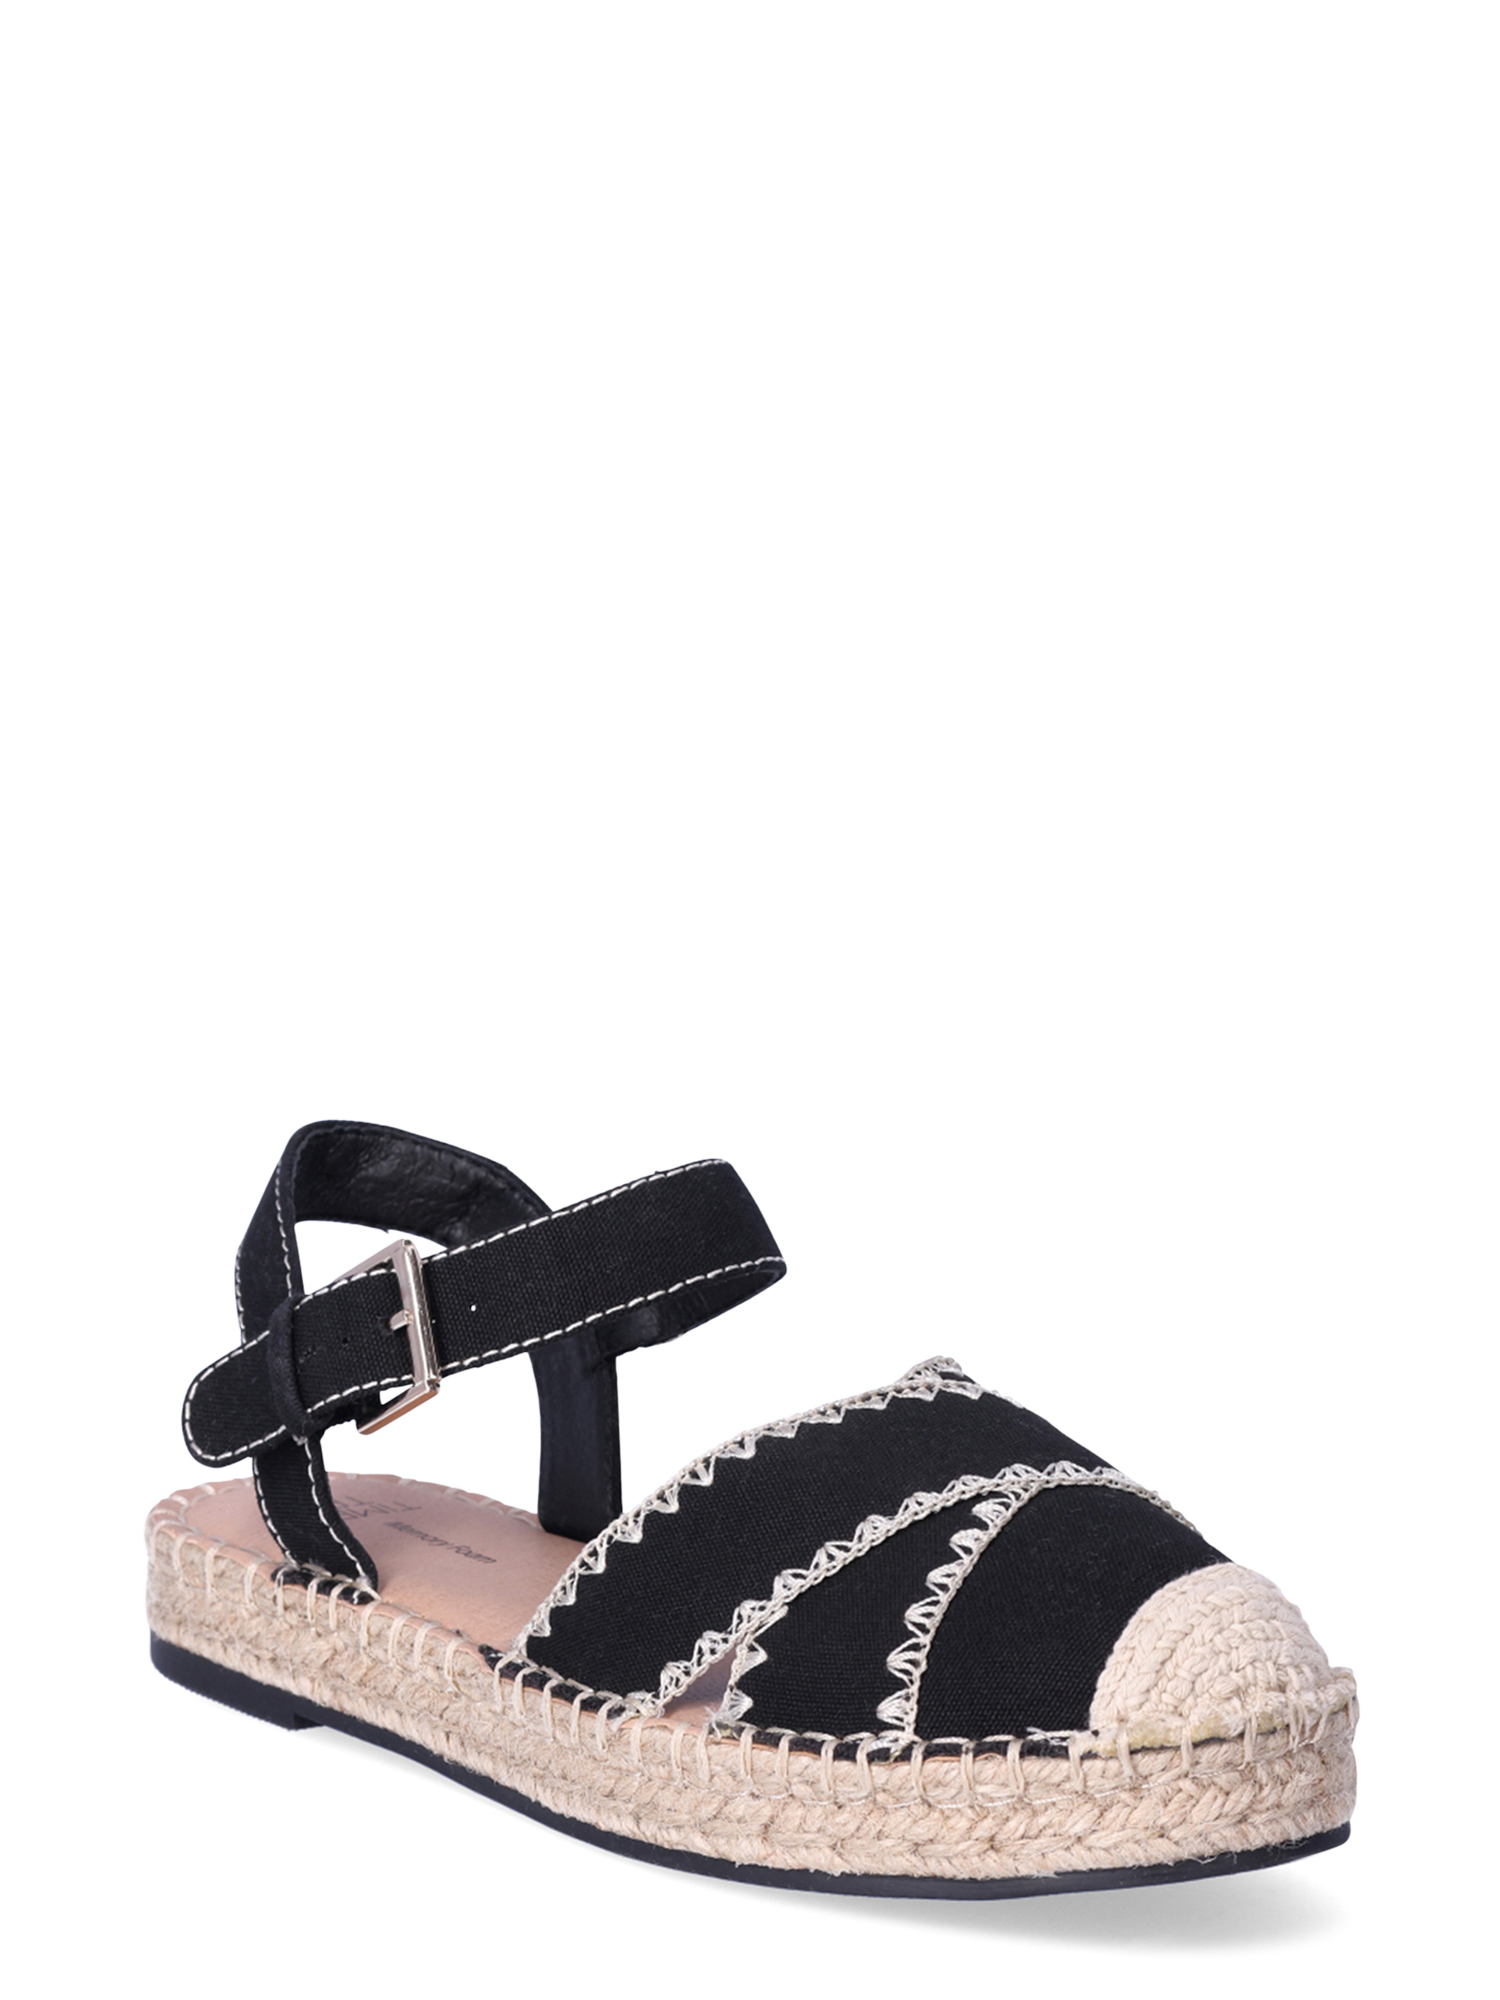 Time and Tru Women’s Espadrille Flats with Ankle Strap - image 1 of 3